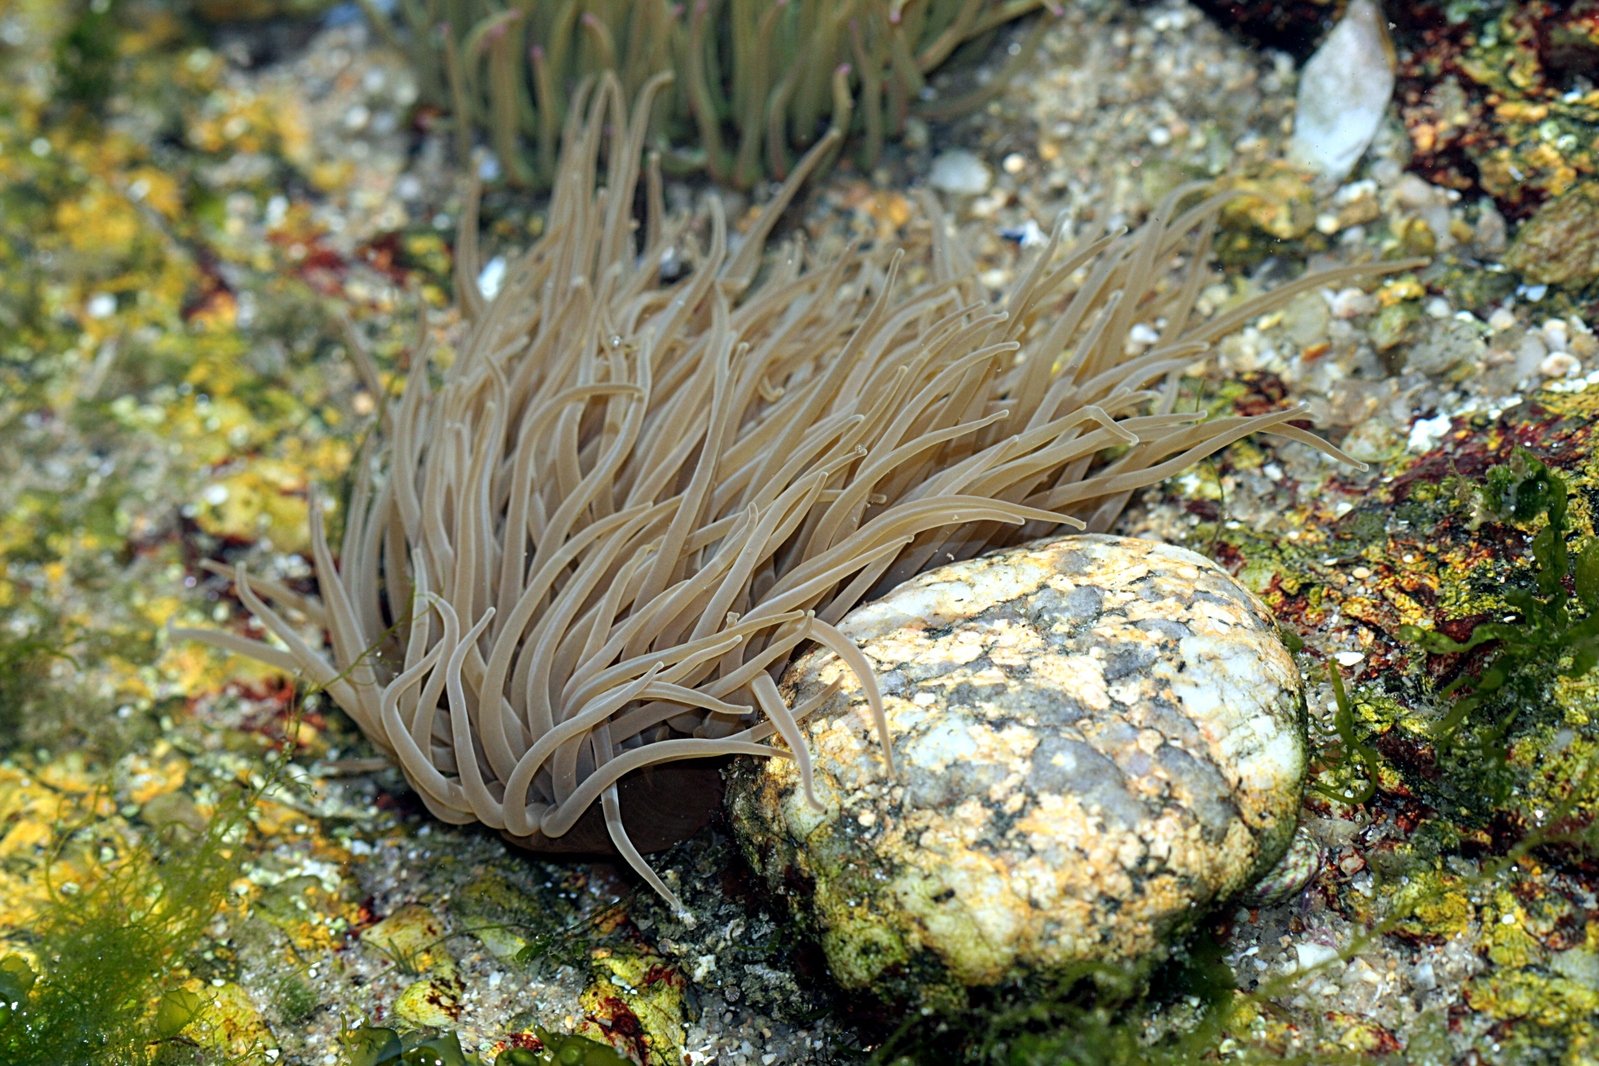 a close up of an underwater sea anemone